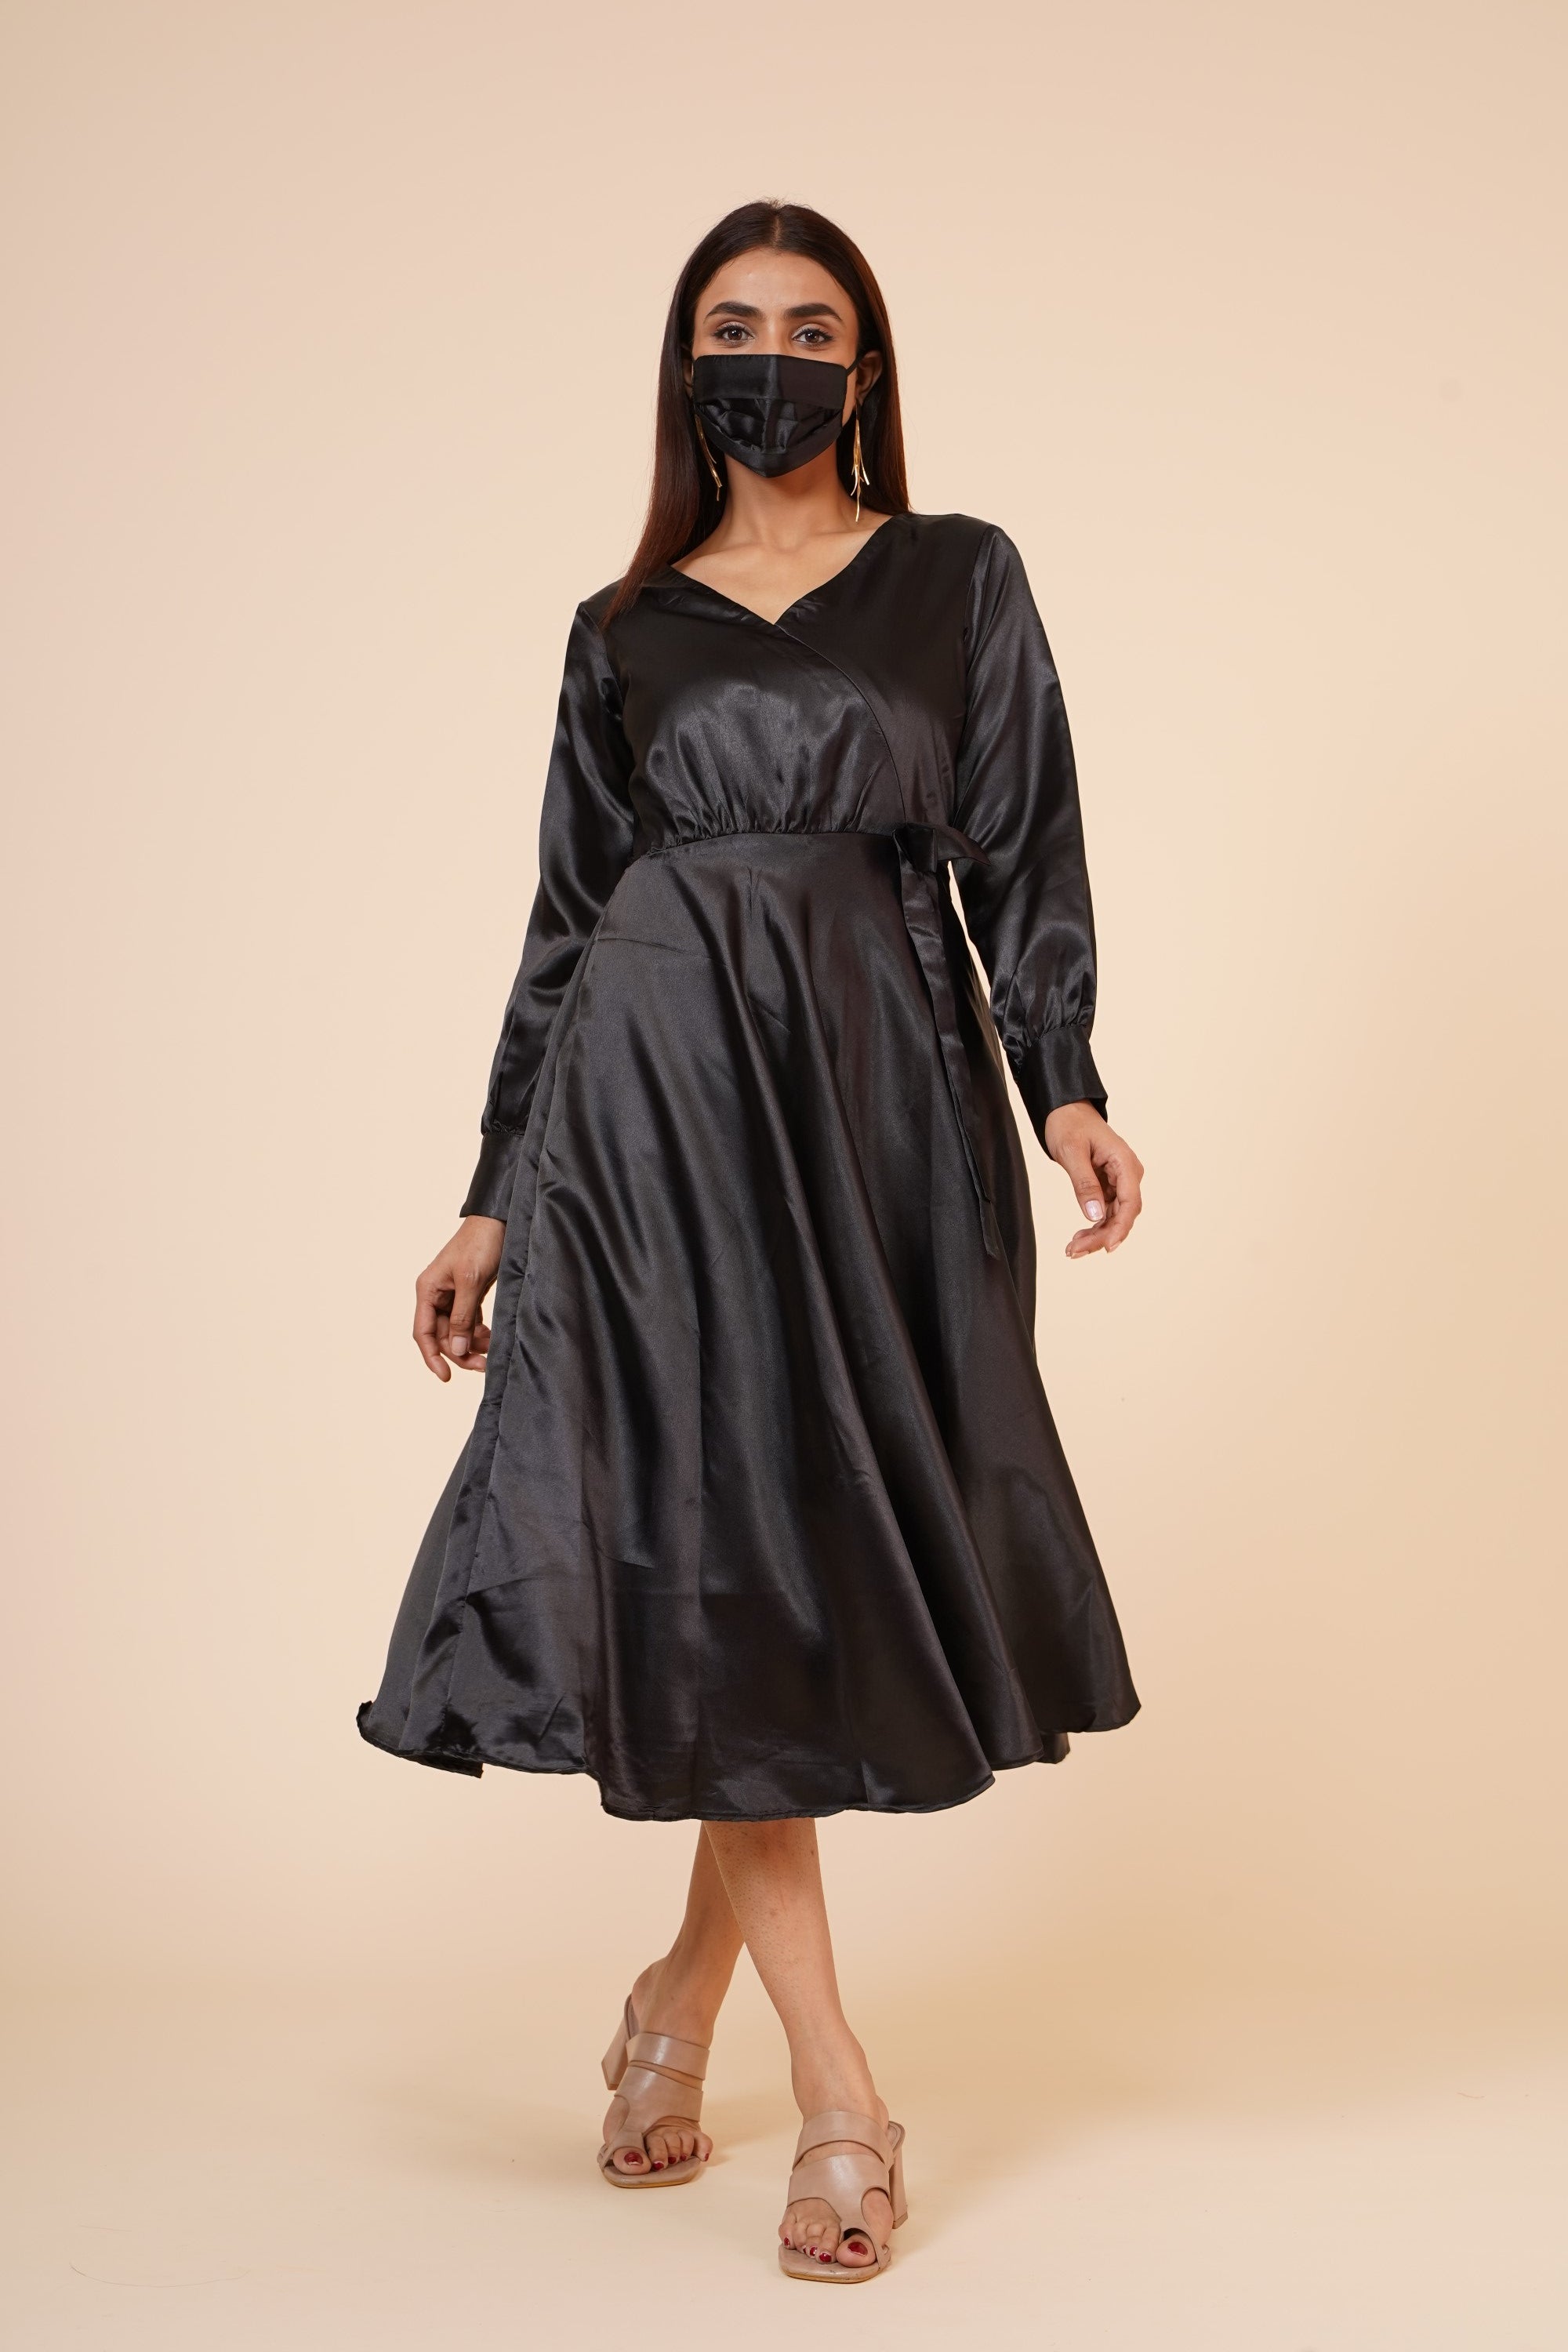 Women's Empire Line With Cuff Satin Wrap Dress Black - MIRACOLOS by Ruchi